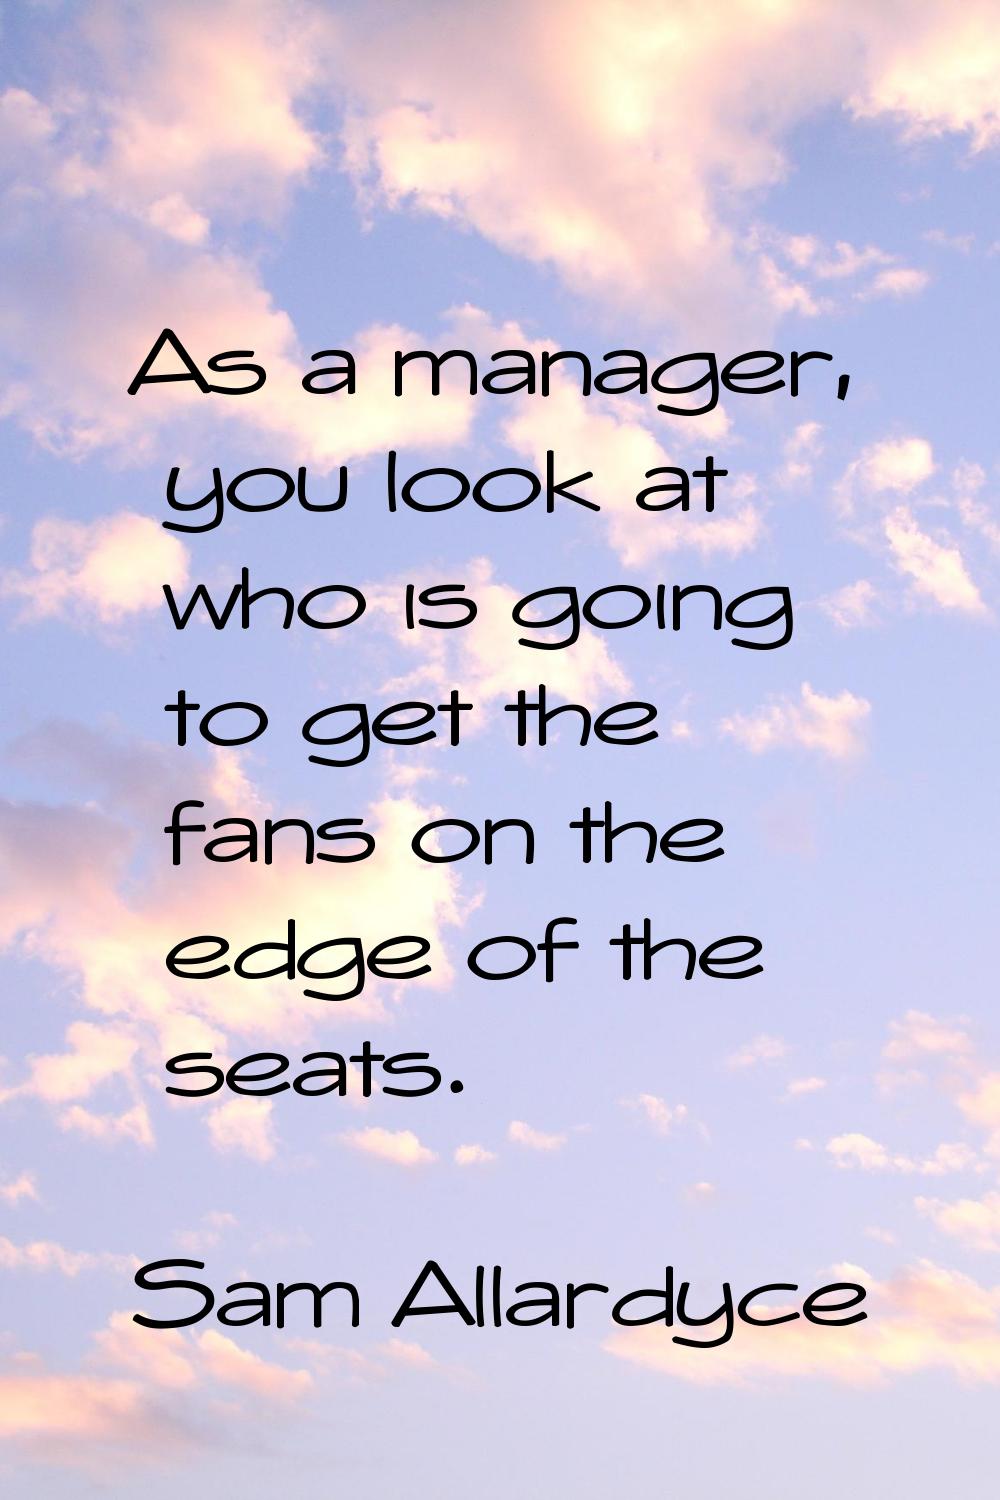 As a manager, you look at who is going to get the fans on the edge of the seats.